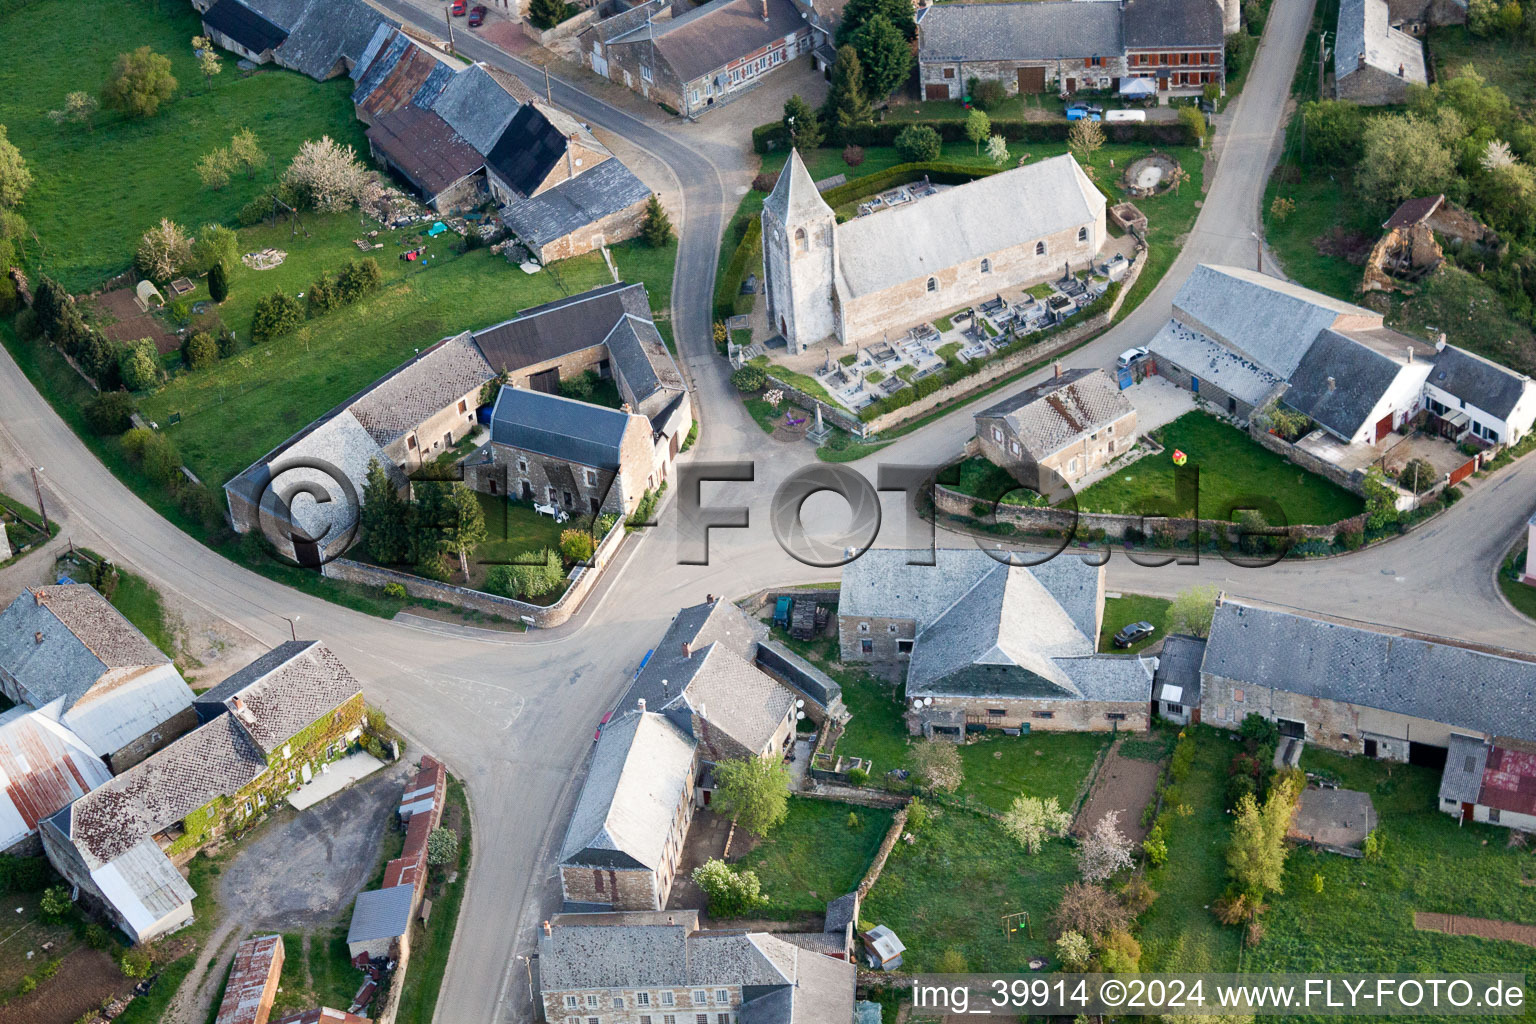 Church building of Eglise Saint-Remy in the village of in Antheny in Alsace-Champagne-Ardenne-Lorraine, France